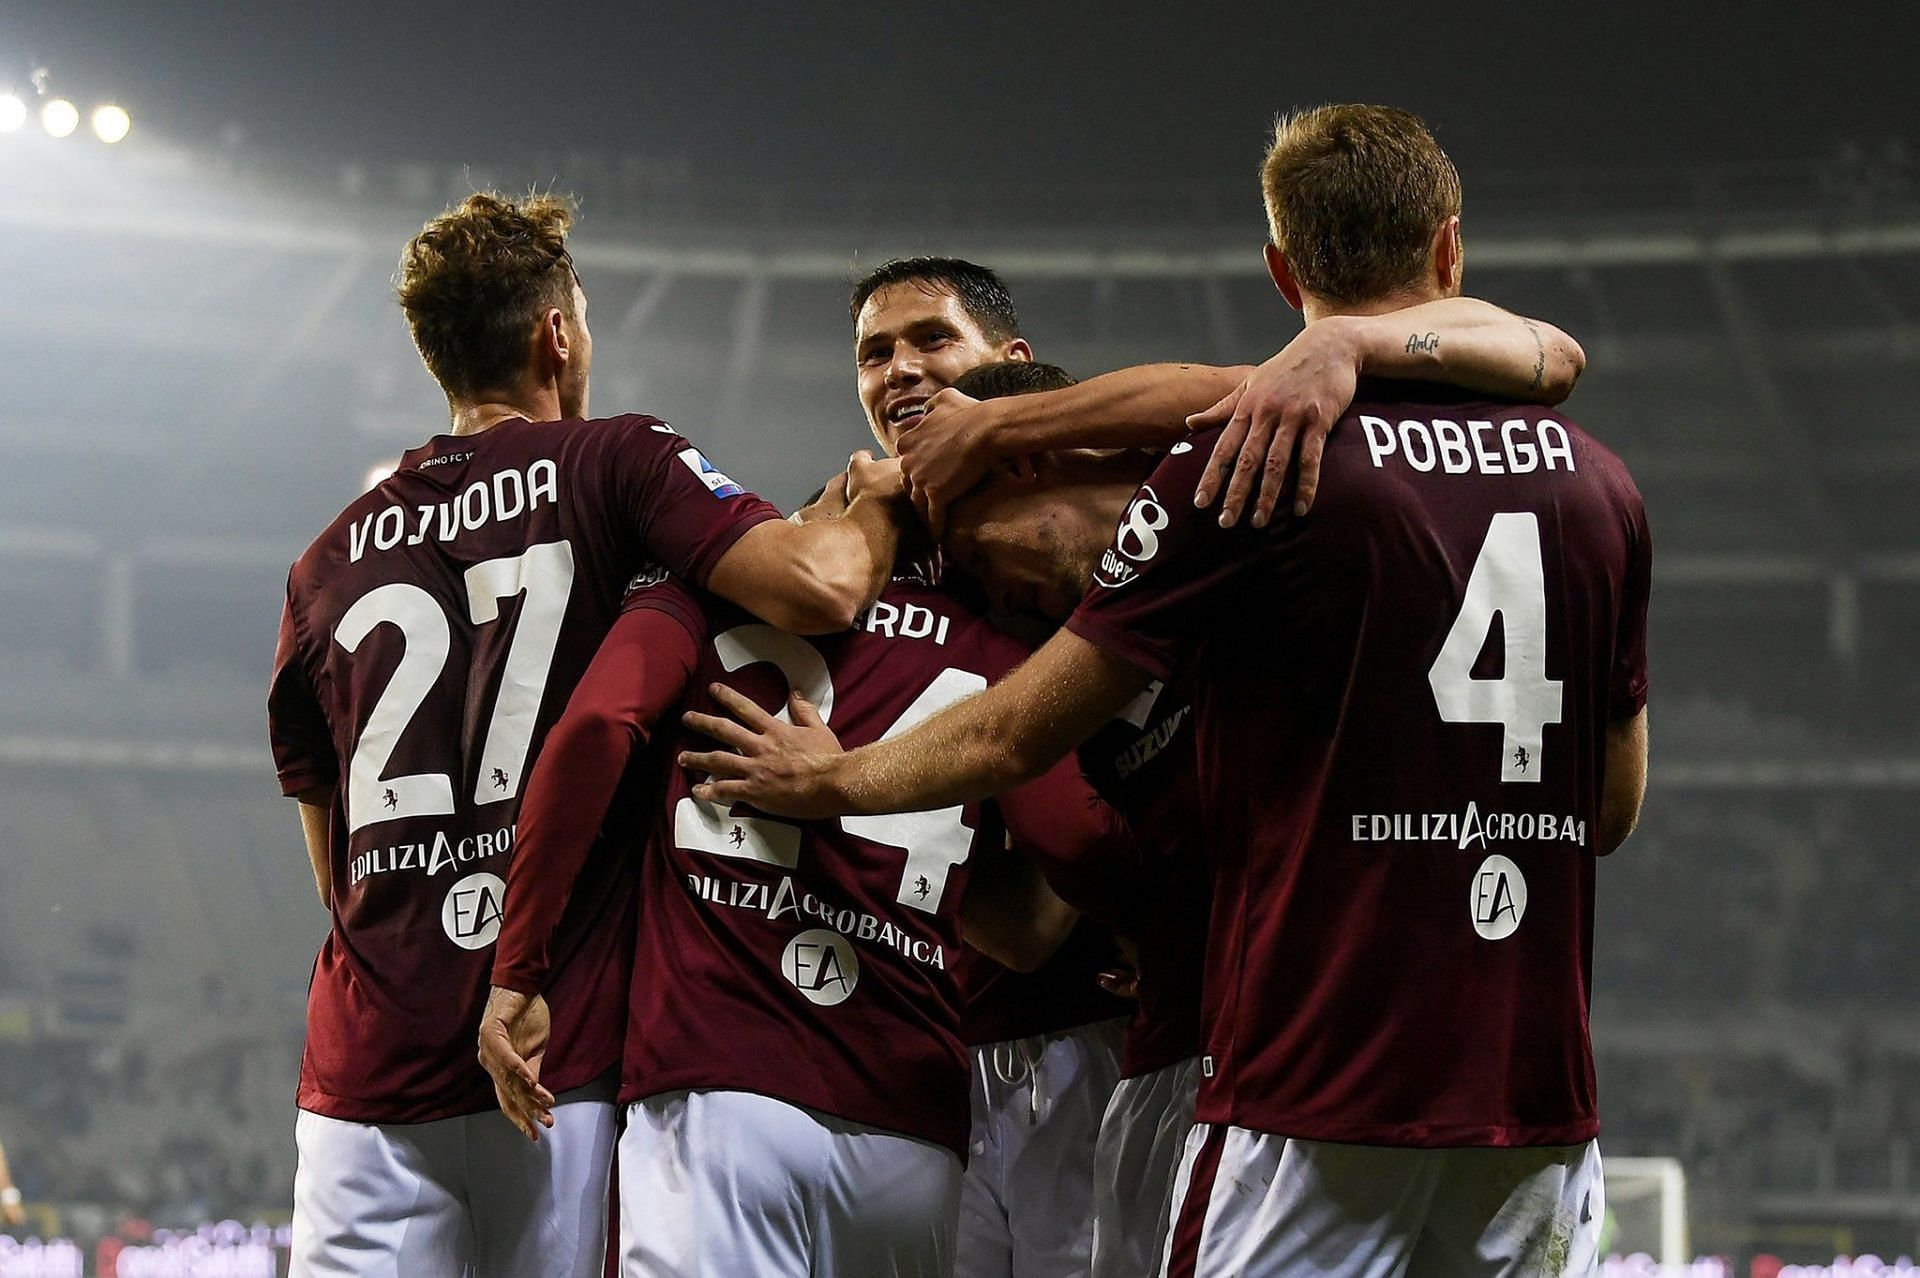 Torino face Spezia in their upcoming Serie A fixture on Saturday